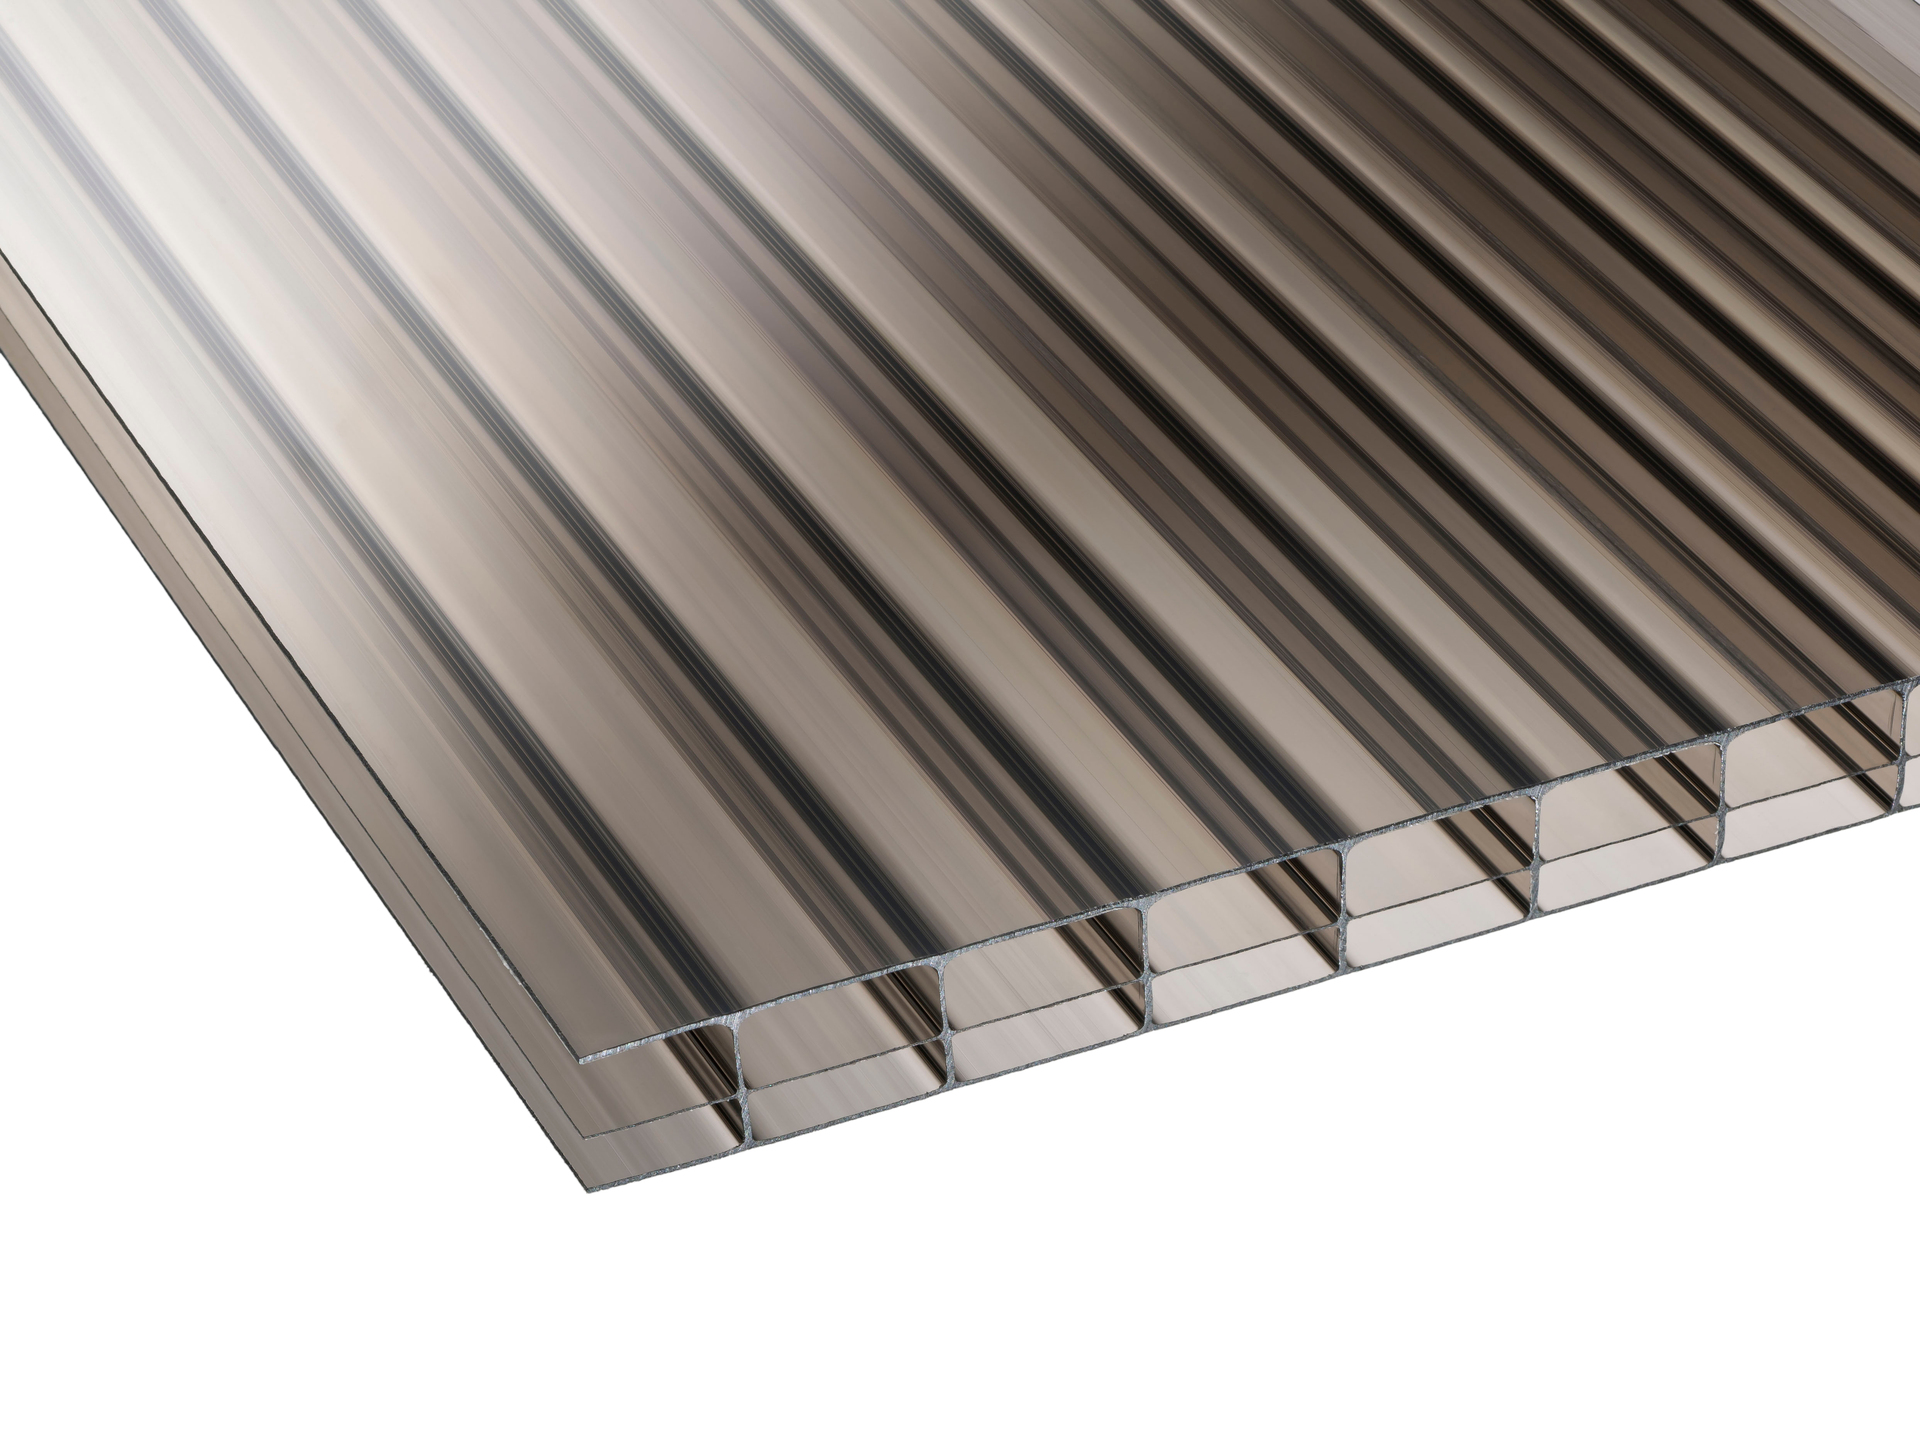 Image of 16mm Bronze Multiwall Polycarbonate Sheet - 3000 x 2100mm